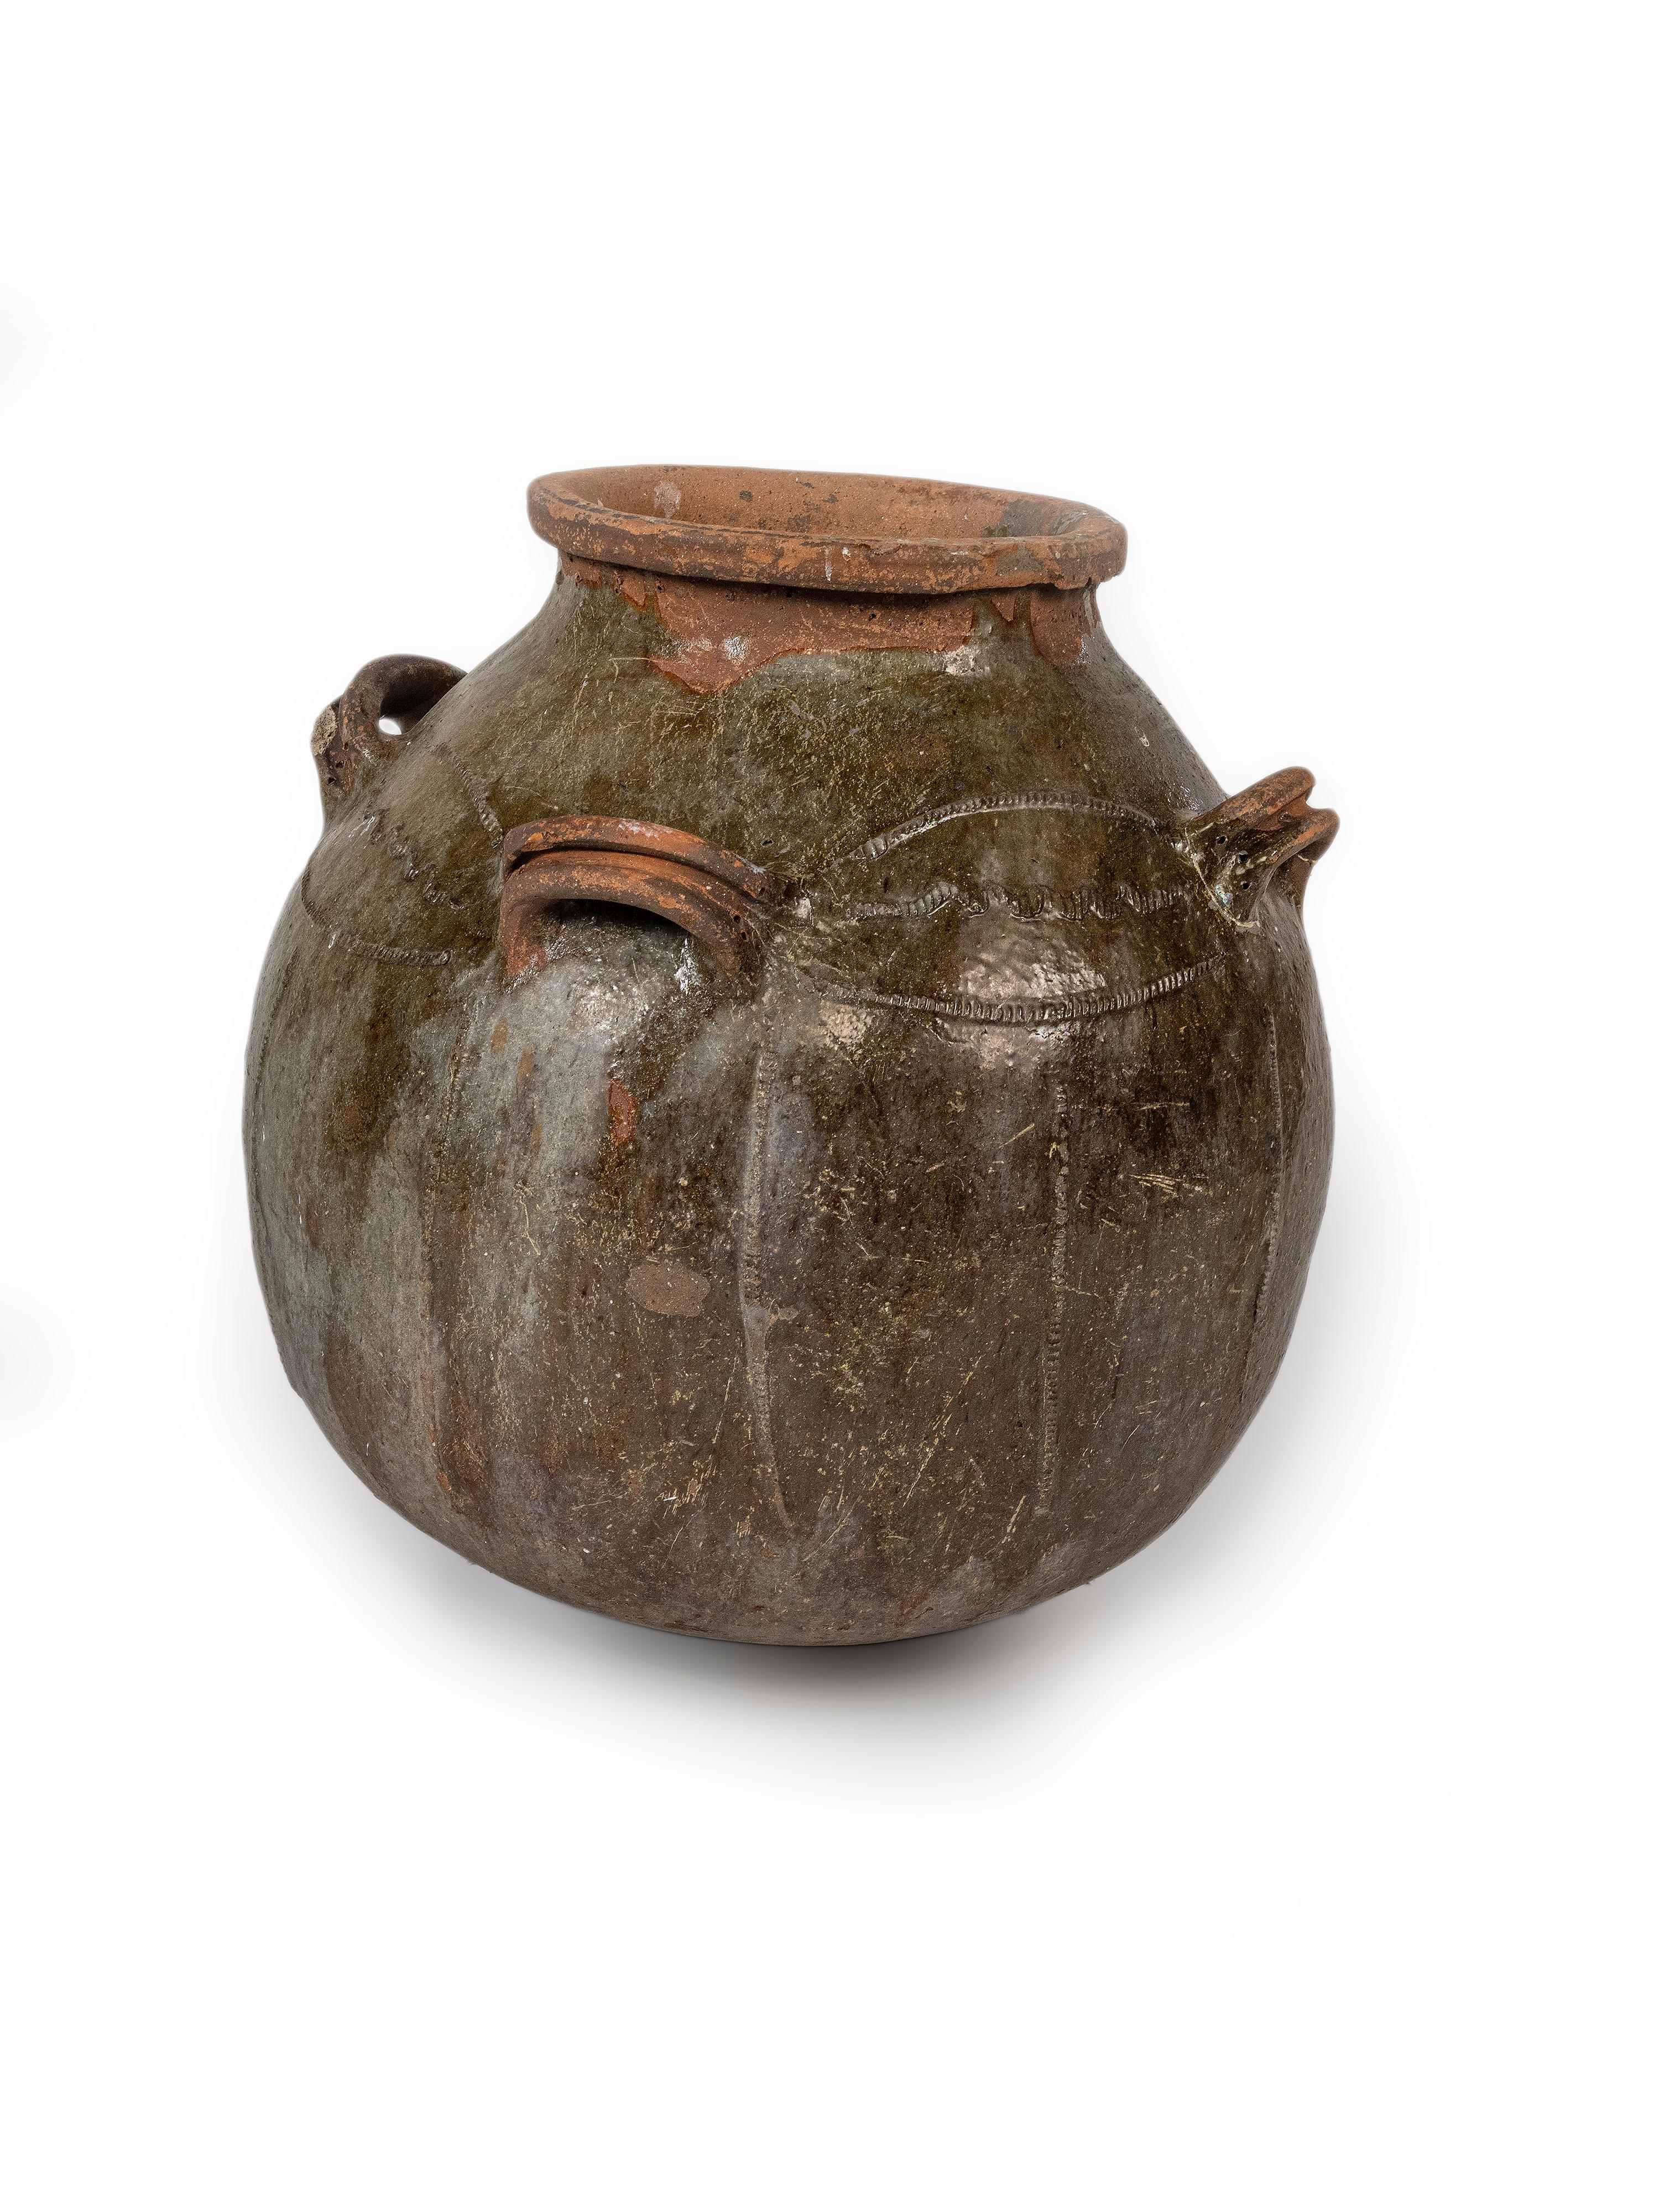 This set of three fermentation jars are from the Auvergne-Rhone-Alpes, department Puy-de-Dome. This set is nice a decorative piece for indoor use or on a terrace. These are large enough that you could you as planters. A wonderful addition to any